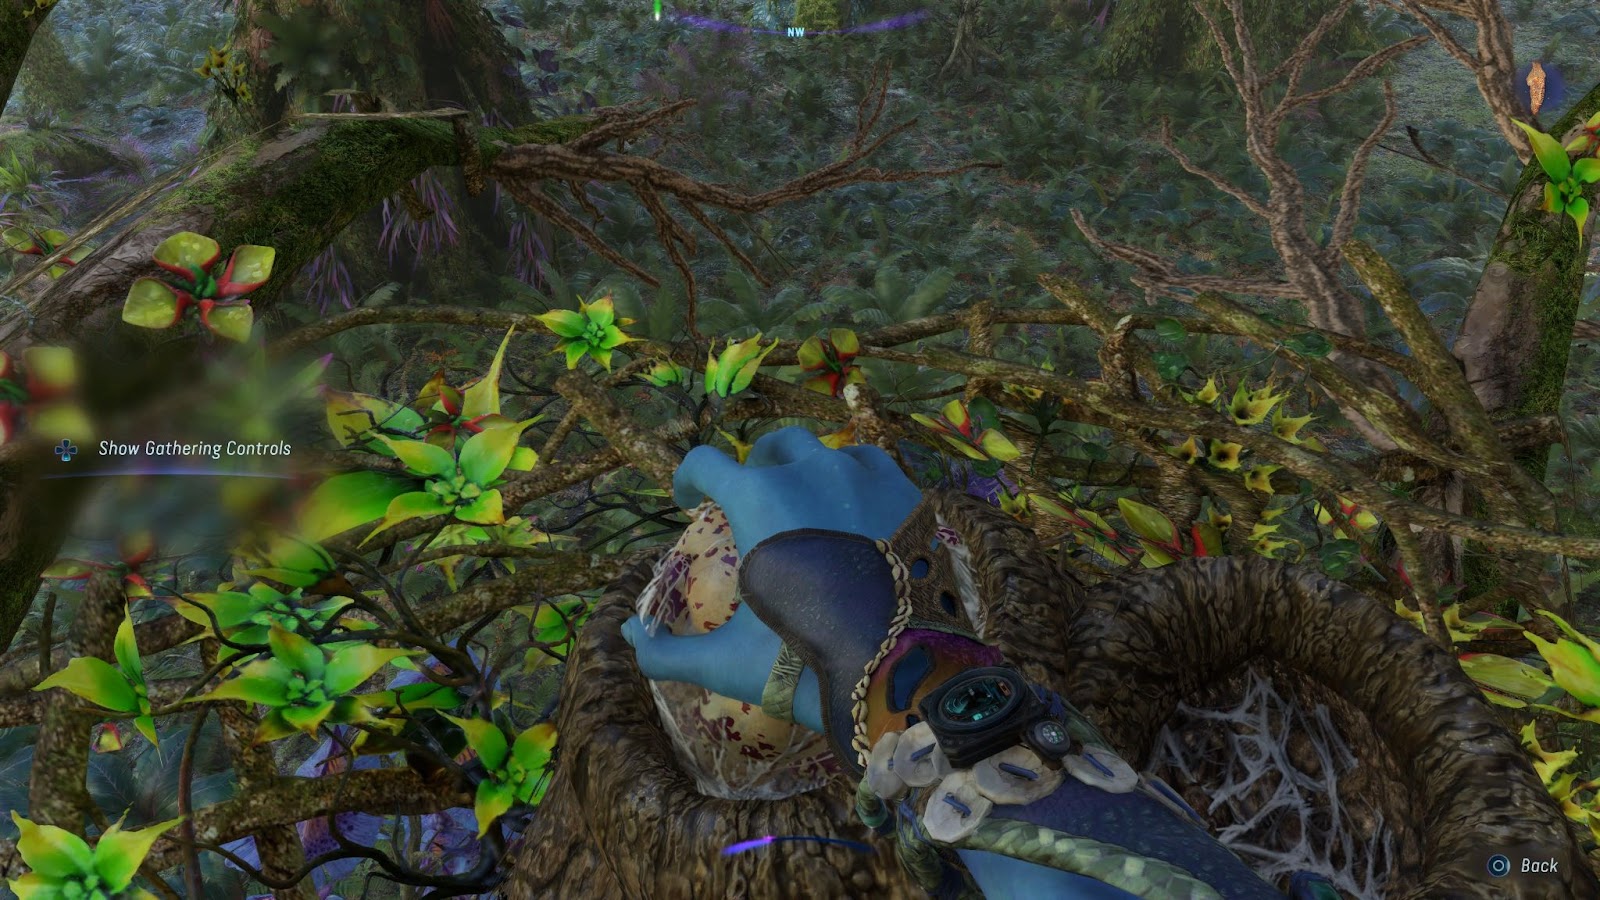 An in game screenshot of harvesting ingredients in the game Avatar: Frontiers of Pandora